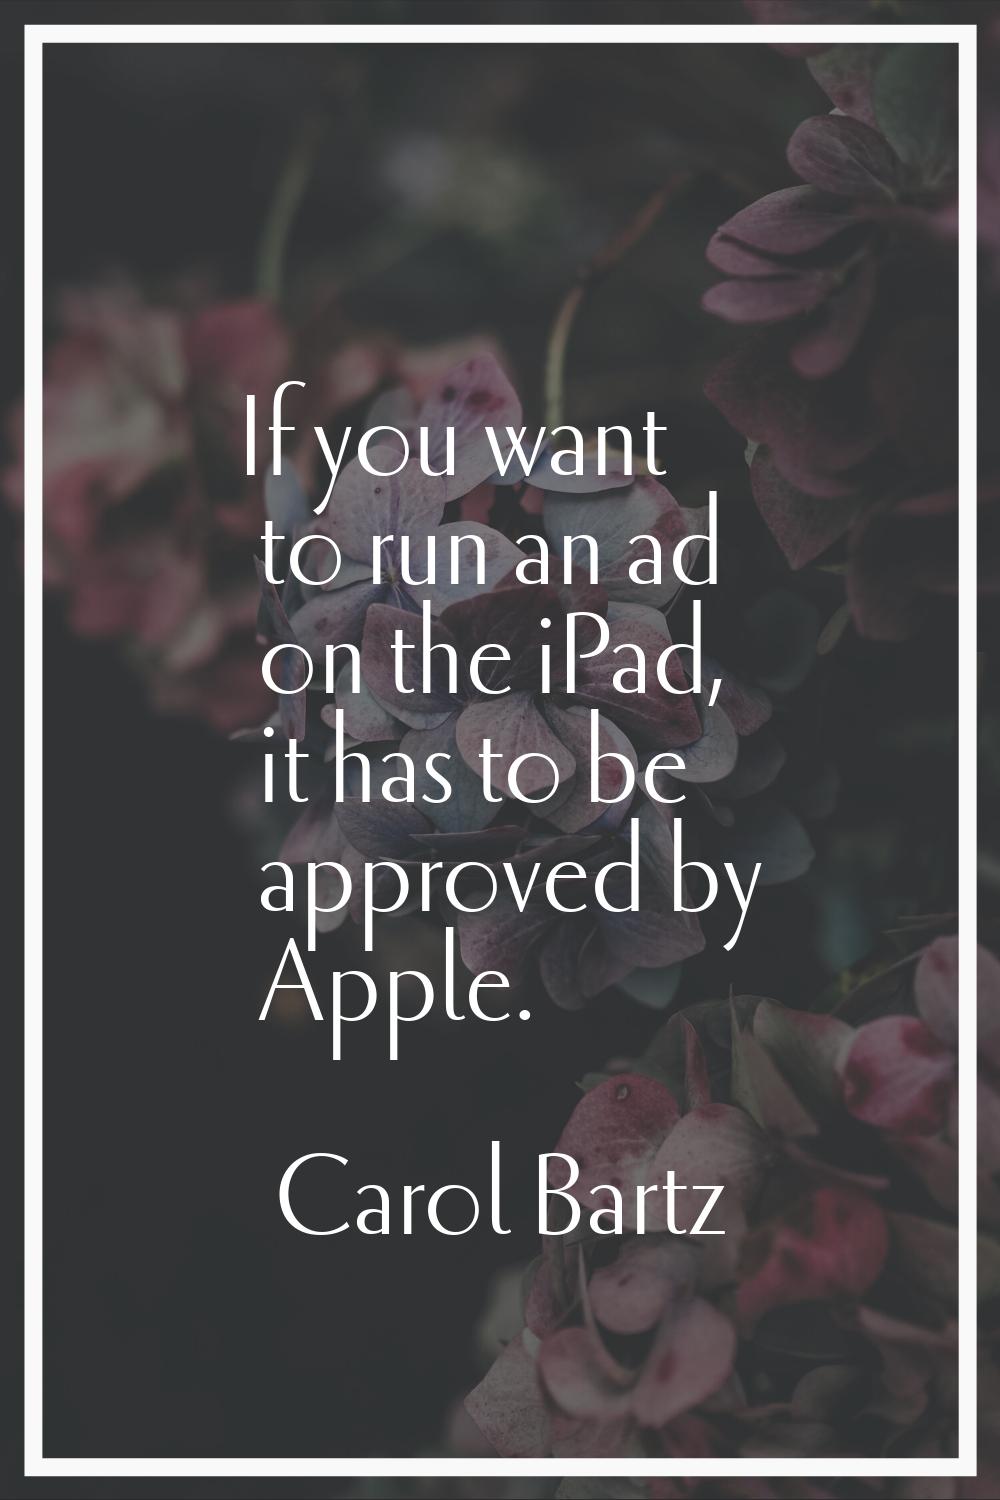 If you want to run an ad on the iPad, it has to be approved by Apple.